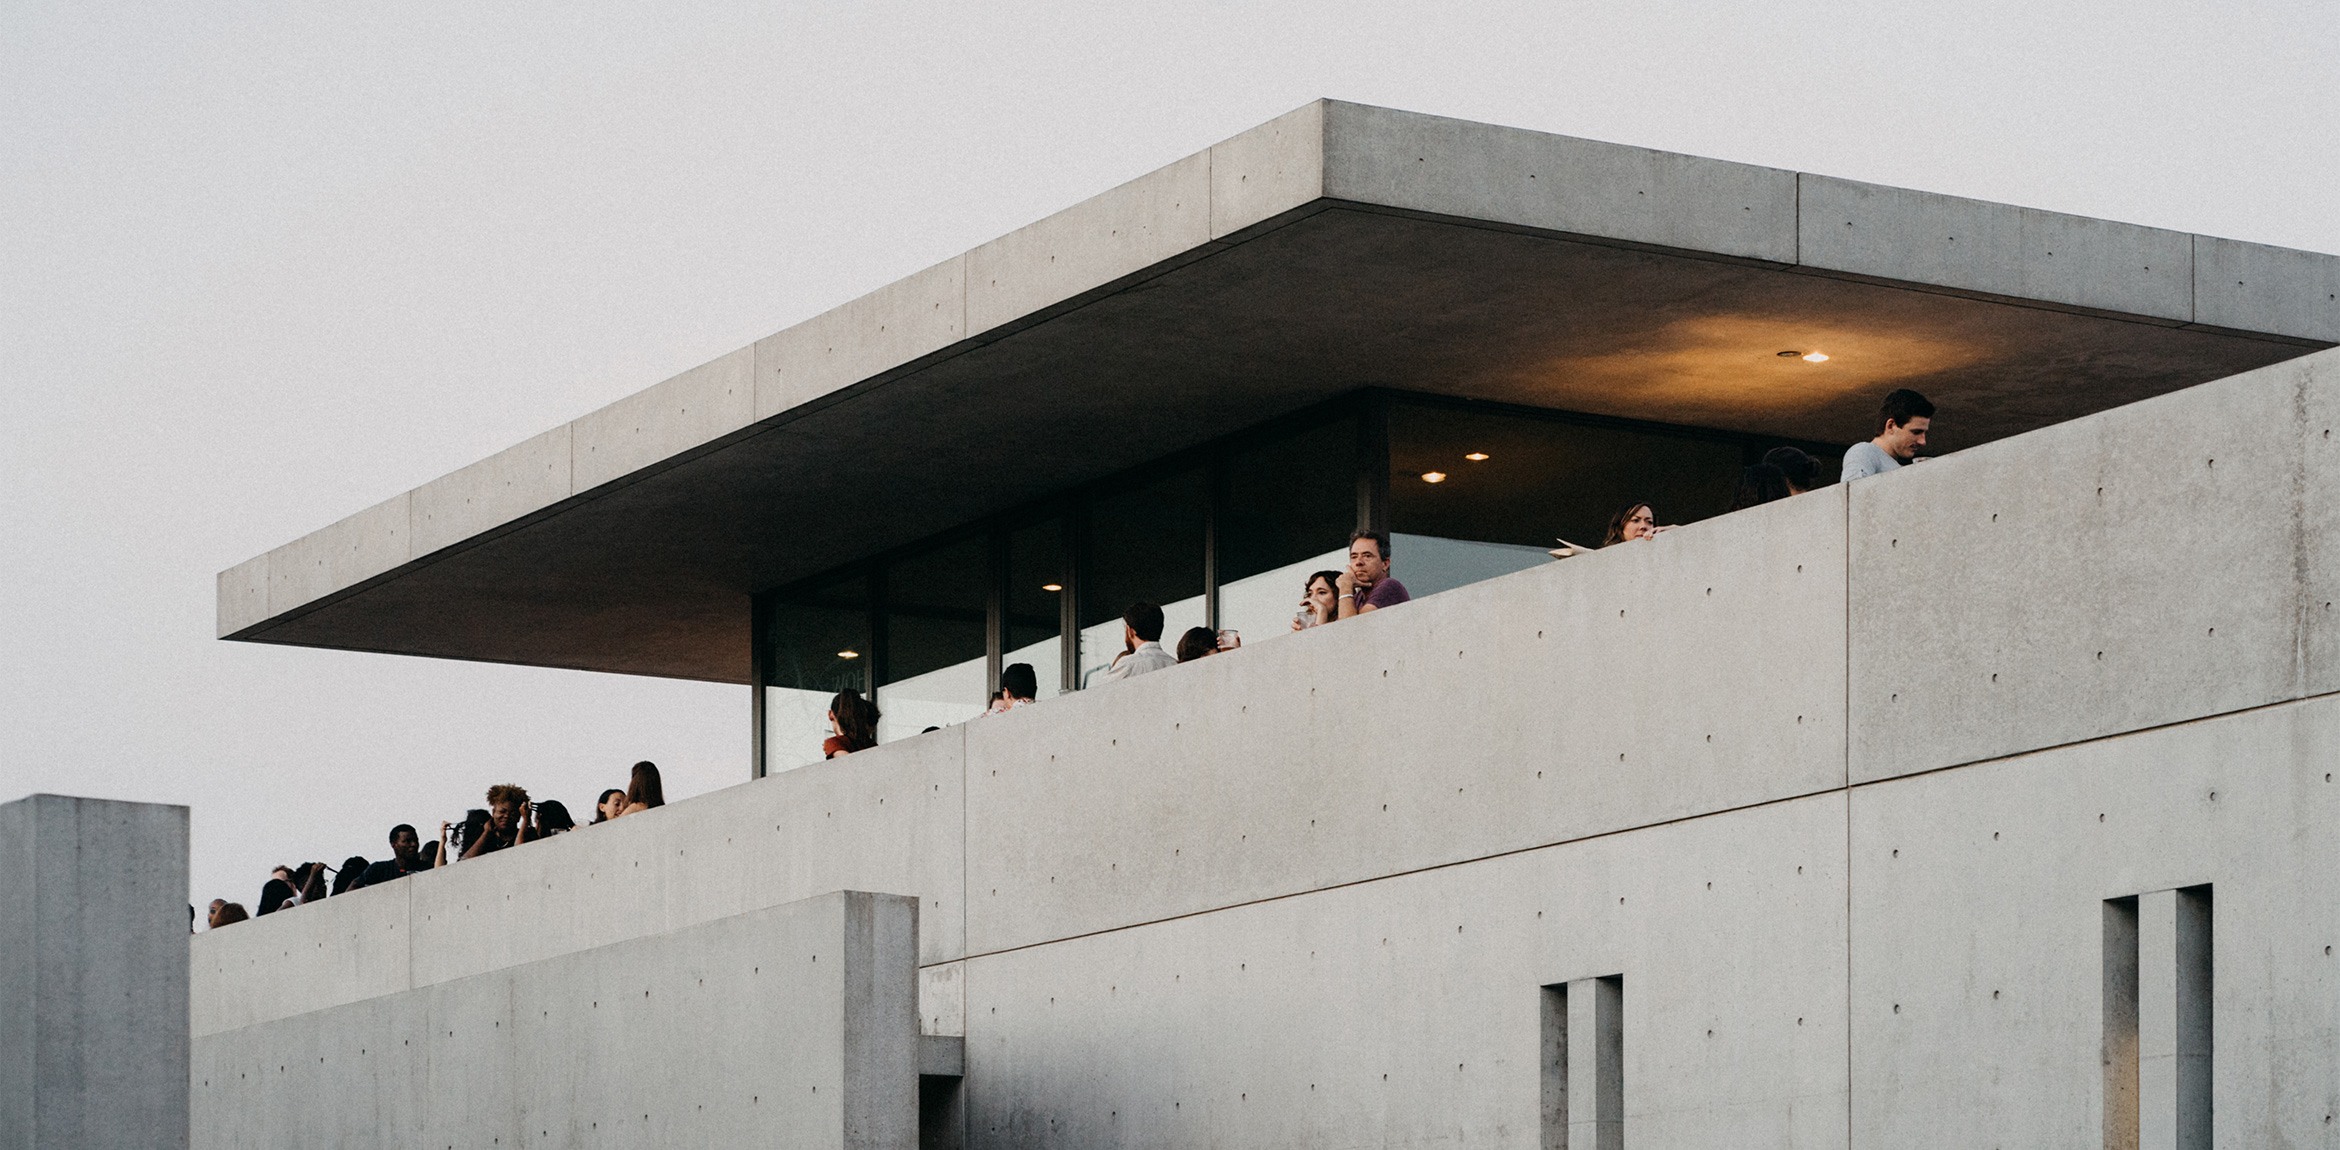 The upper exterior mezzanine of the museum with several event attendees gazing over the ledge